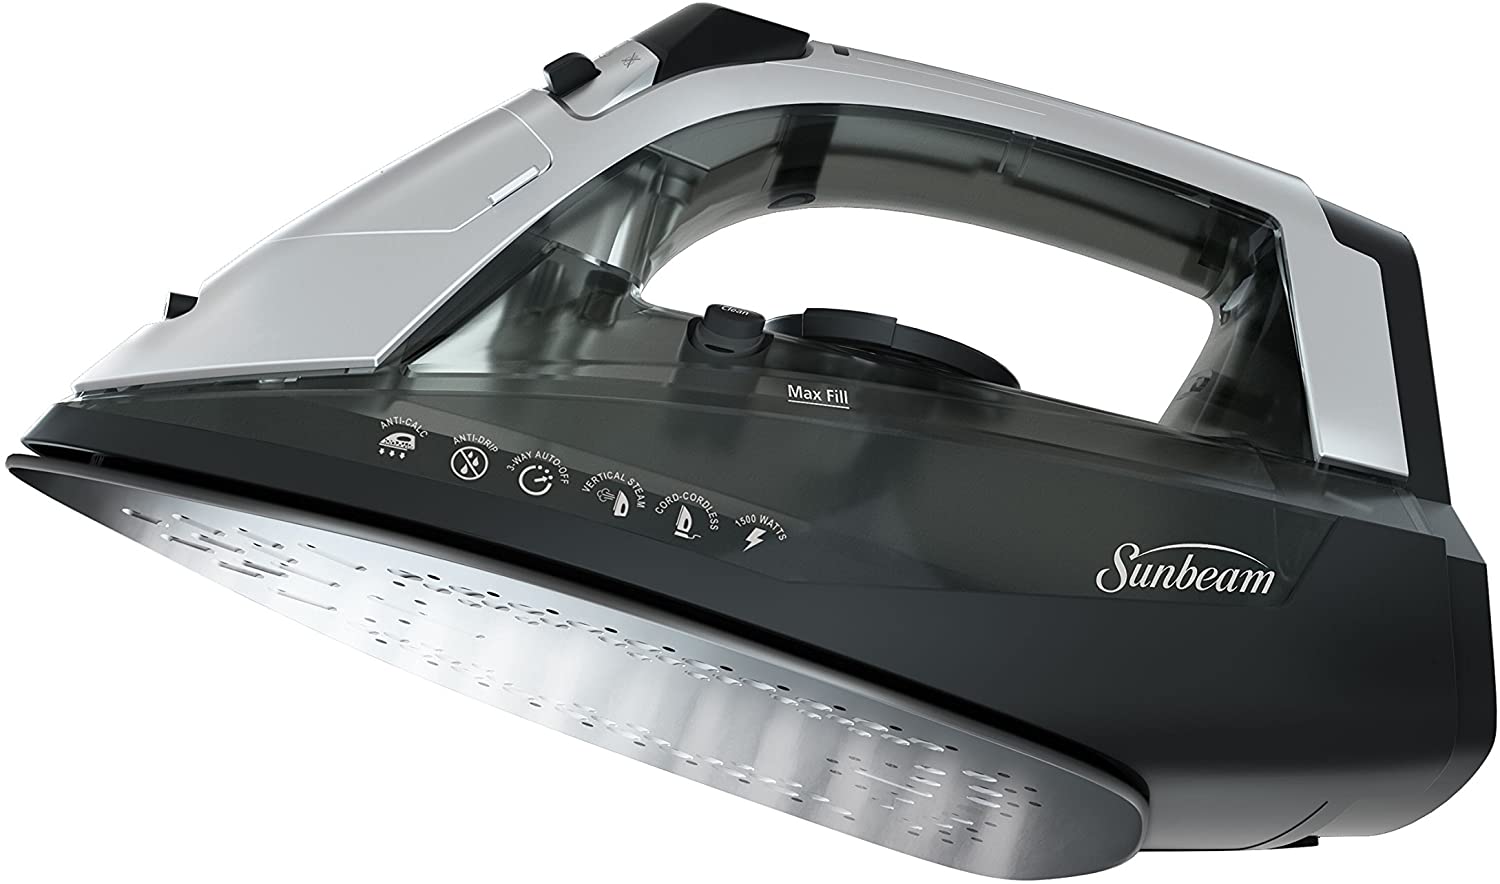 Sunbeam - Versa Glide Rechargeable Cordless/Corded 1500 Watt Iron with Stainless Steel Soleplate, Black